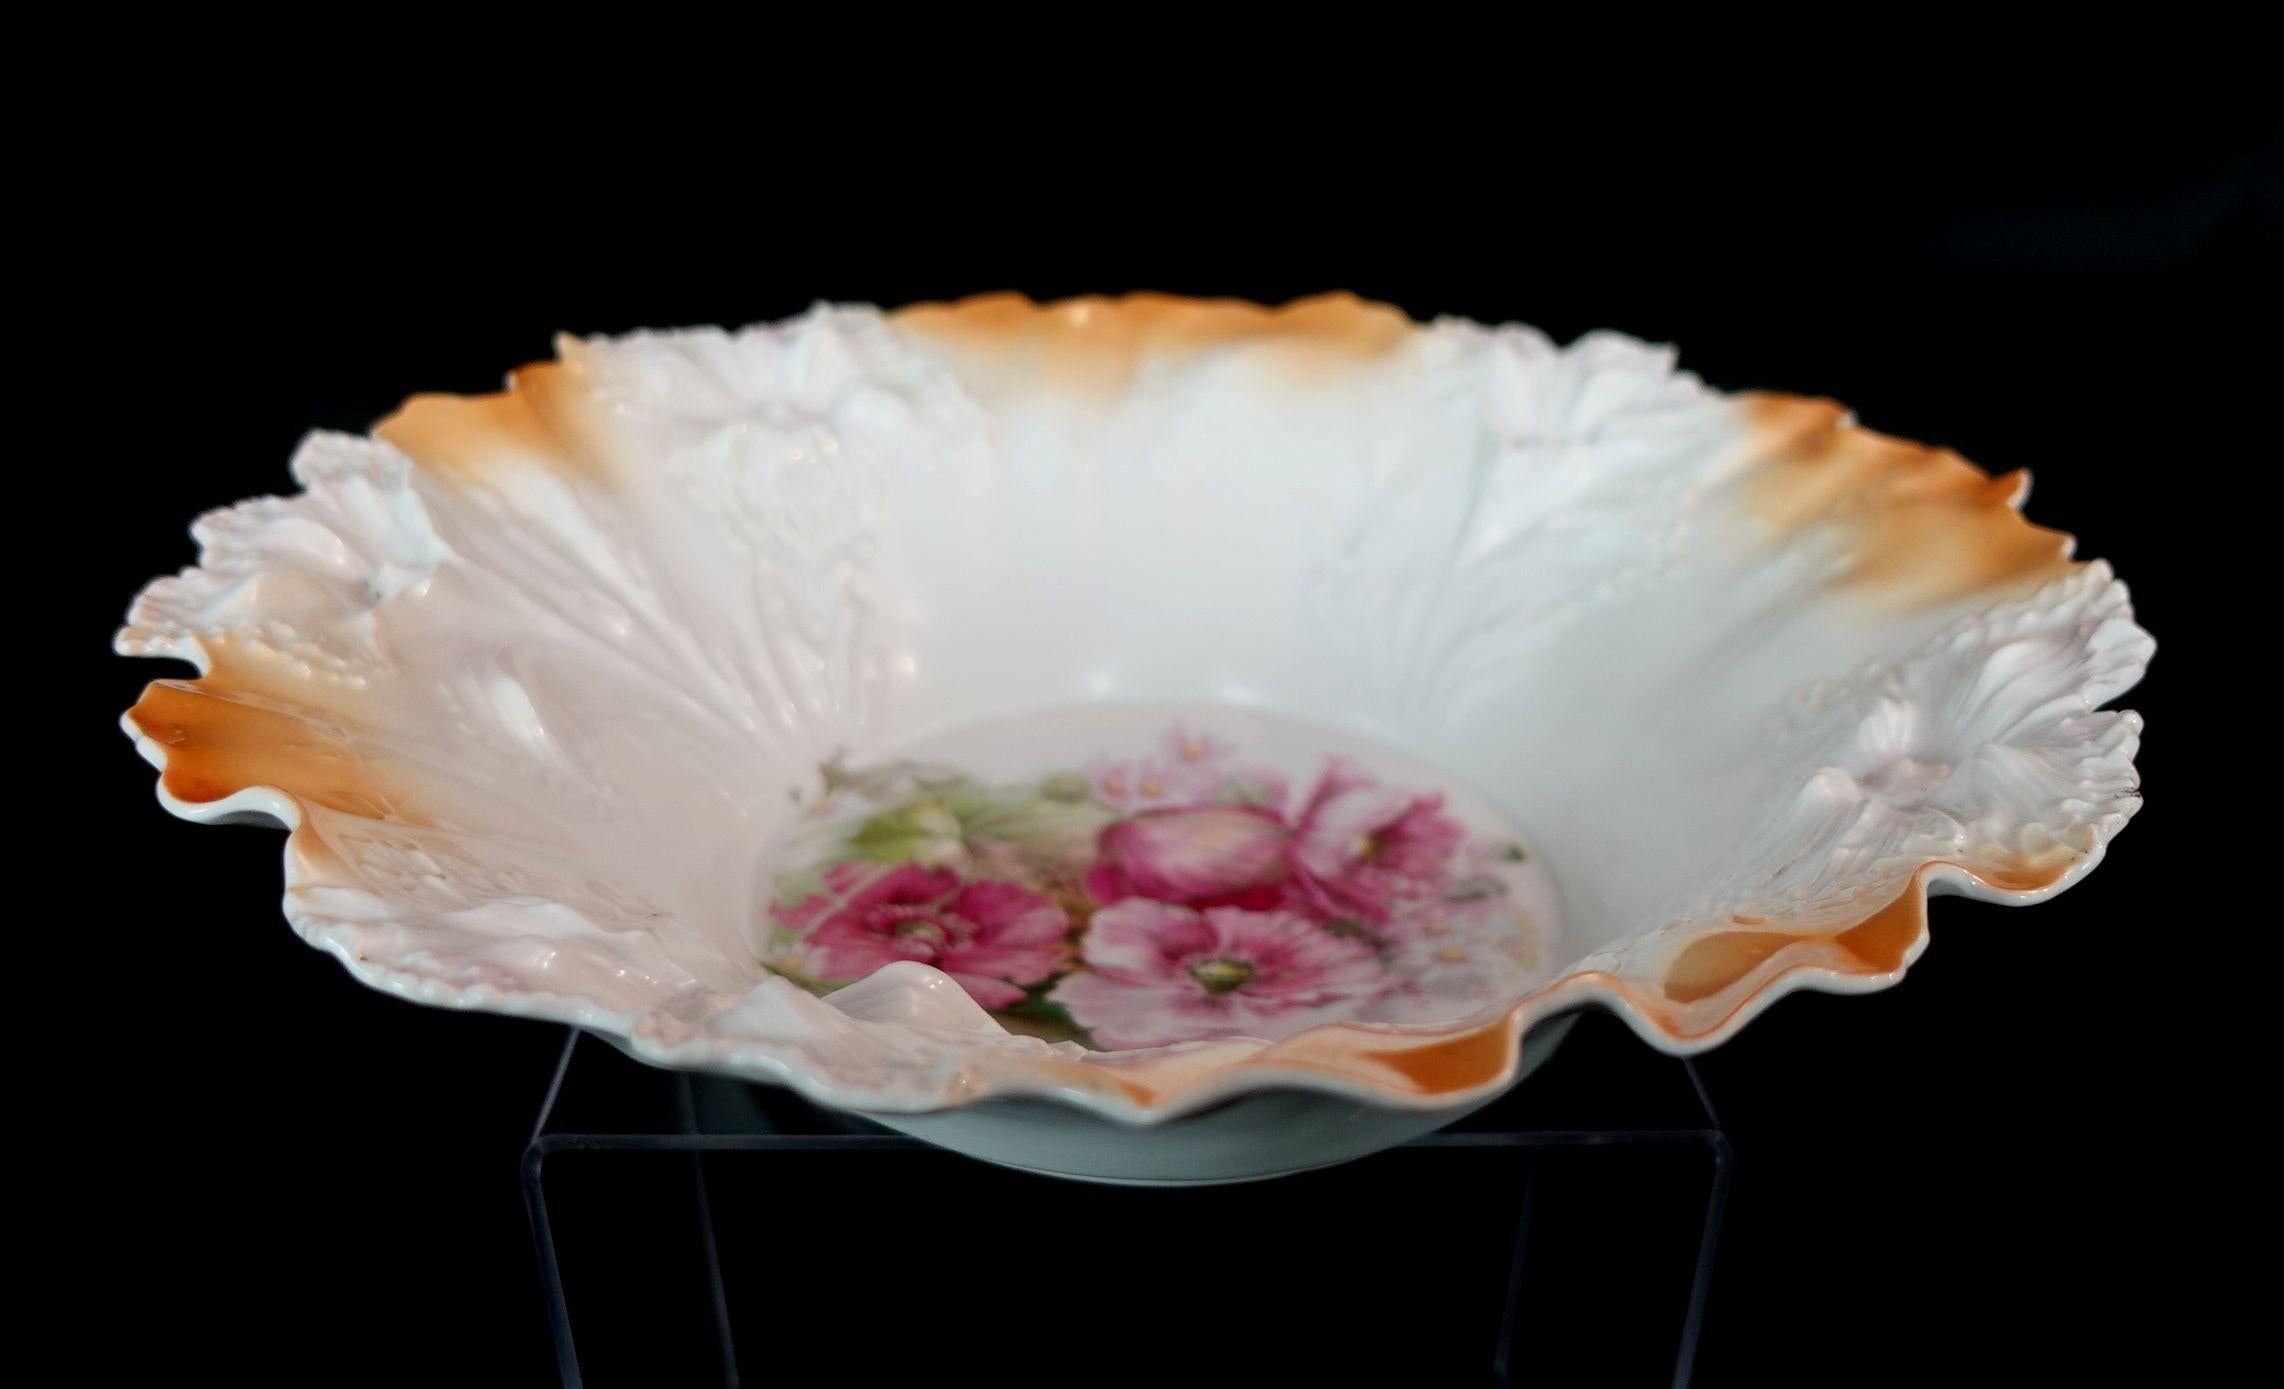 A wonderful RS Prussia German porcelain bowl in lovely multi-colors, the center of the bowl has beautiful many flowers especially, the roses also presenting in different colors, a very adorable artwork.
 